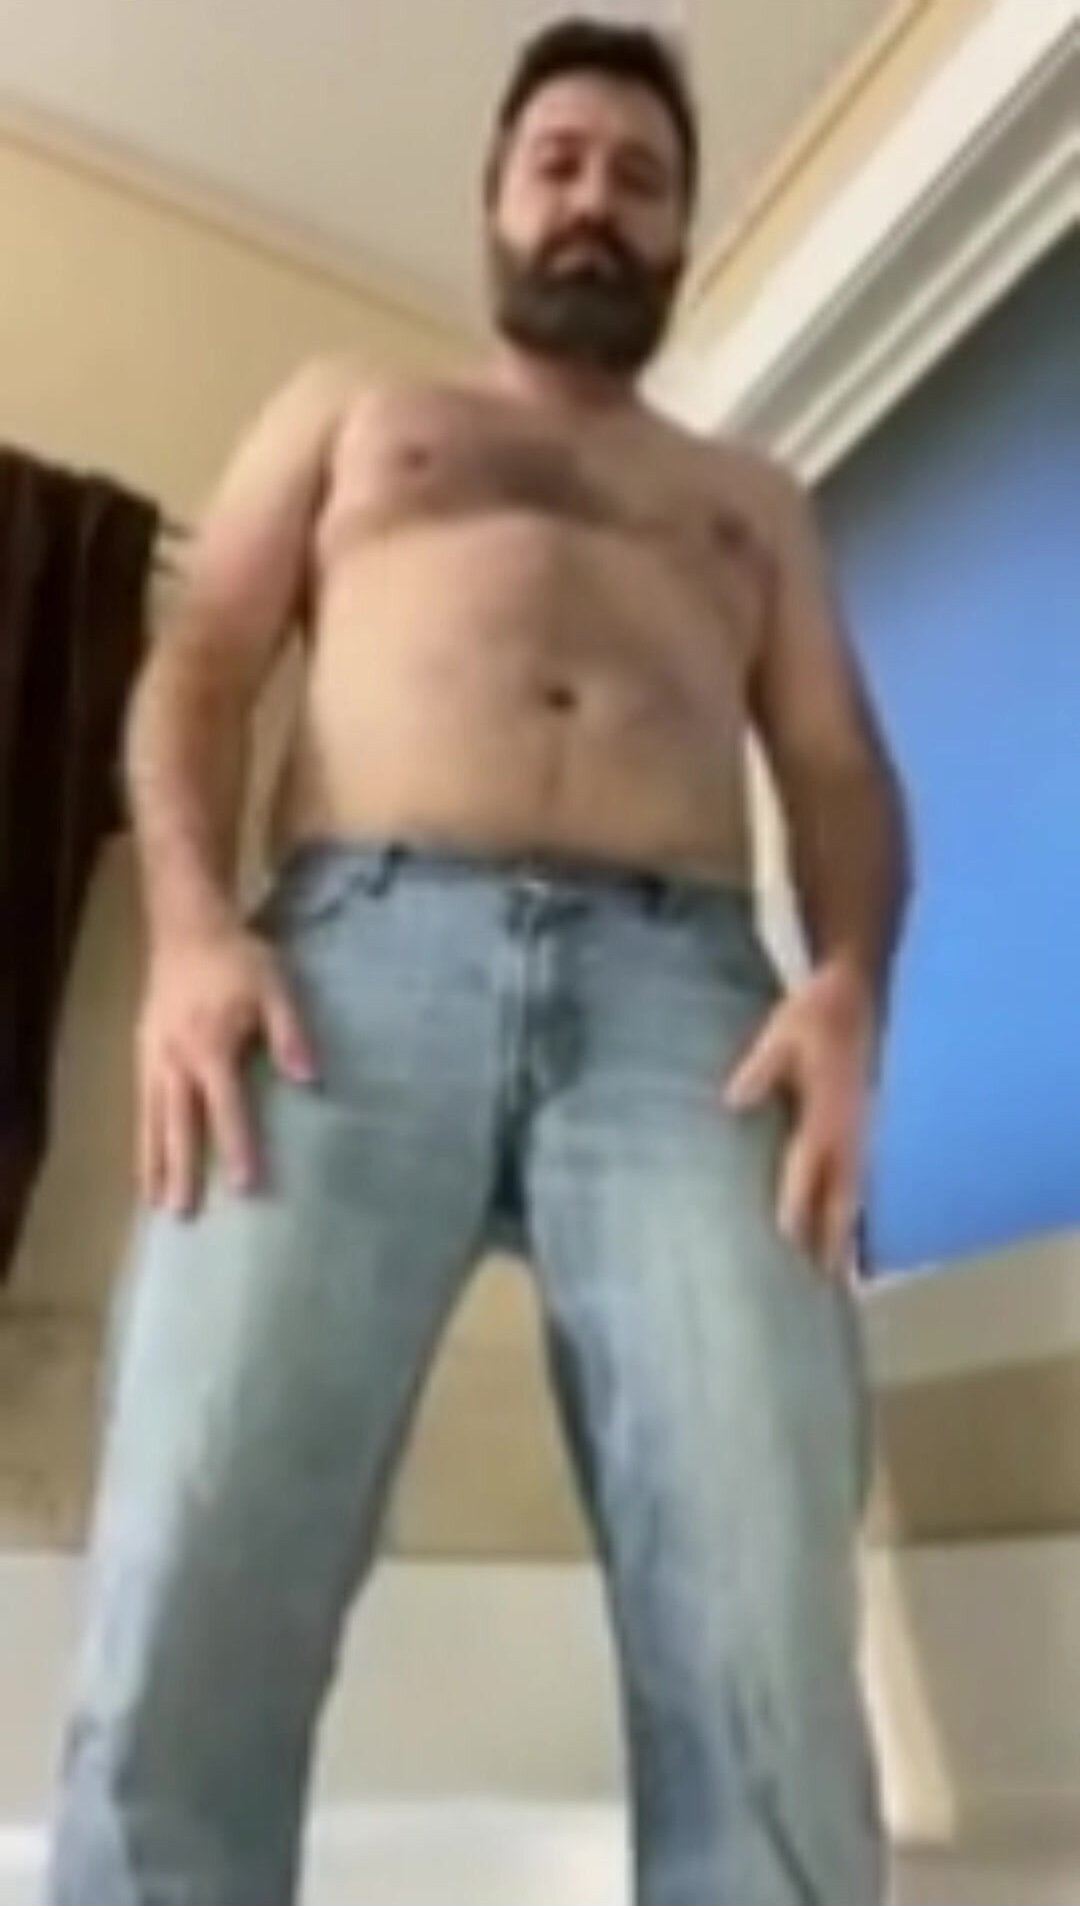 Piss Himself Wearing Tight Light colored Jeans